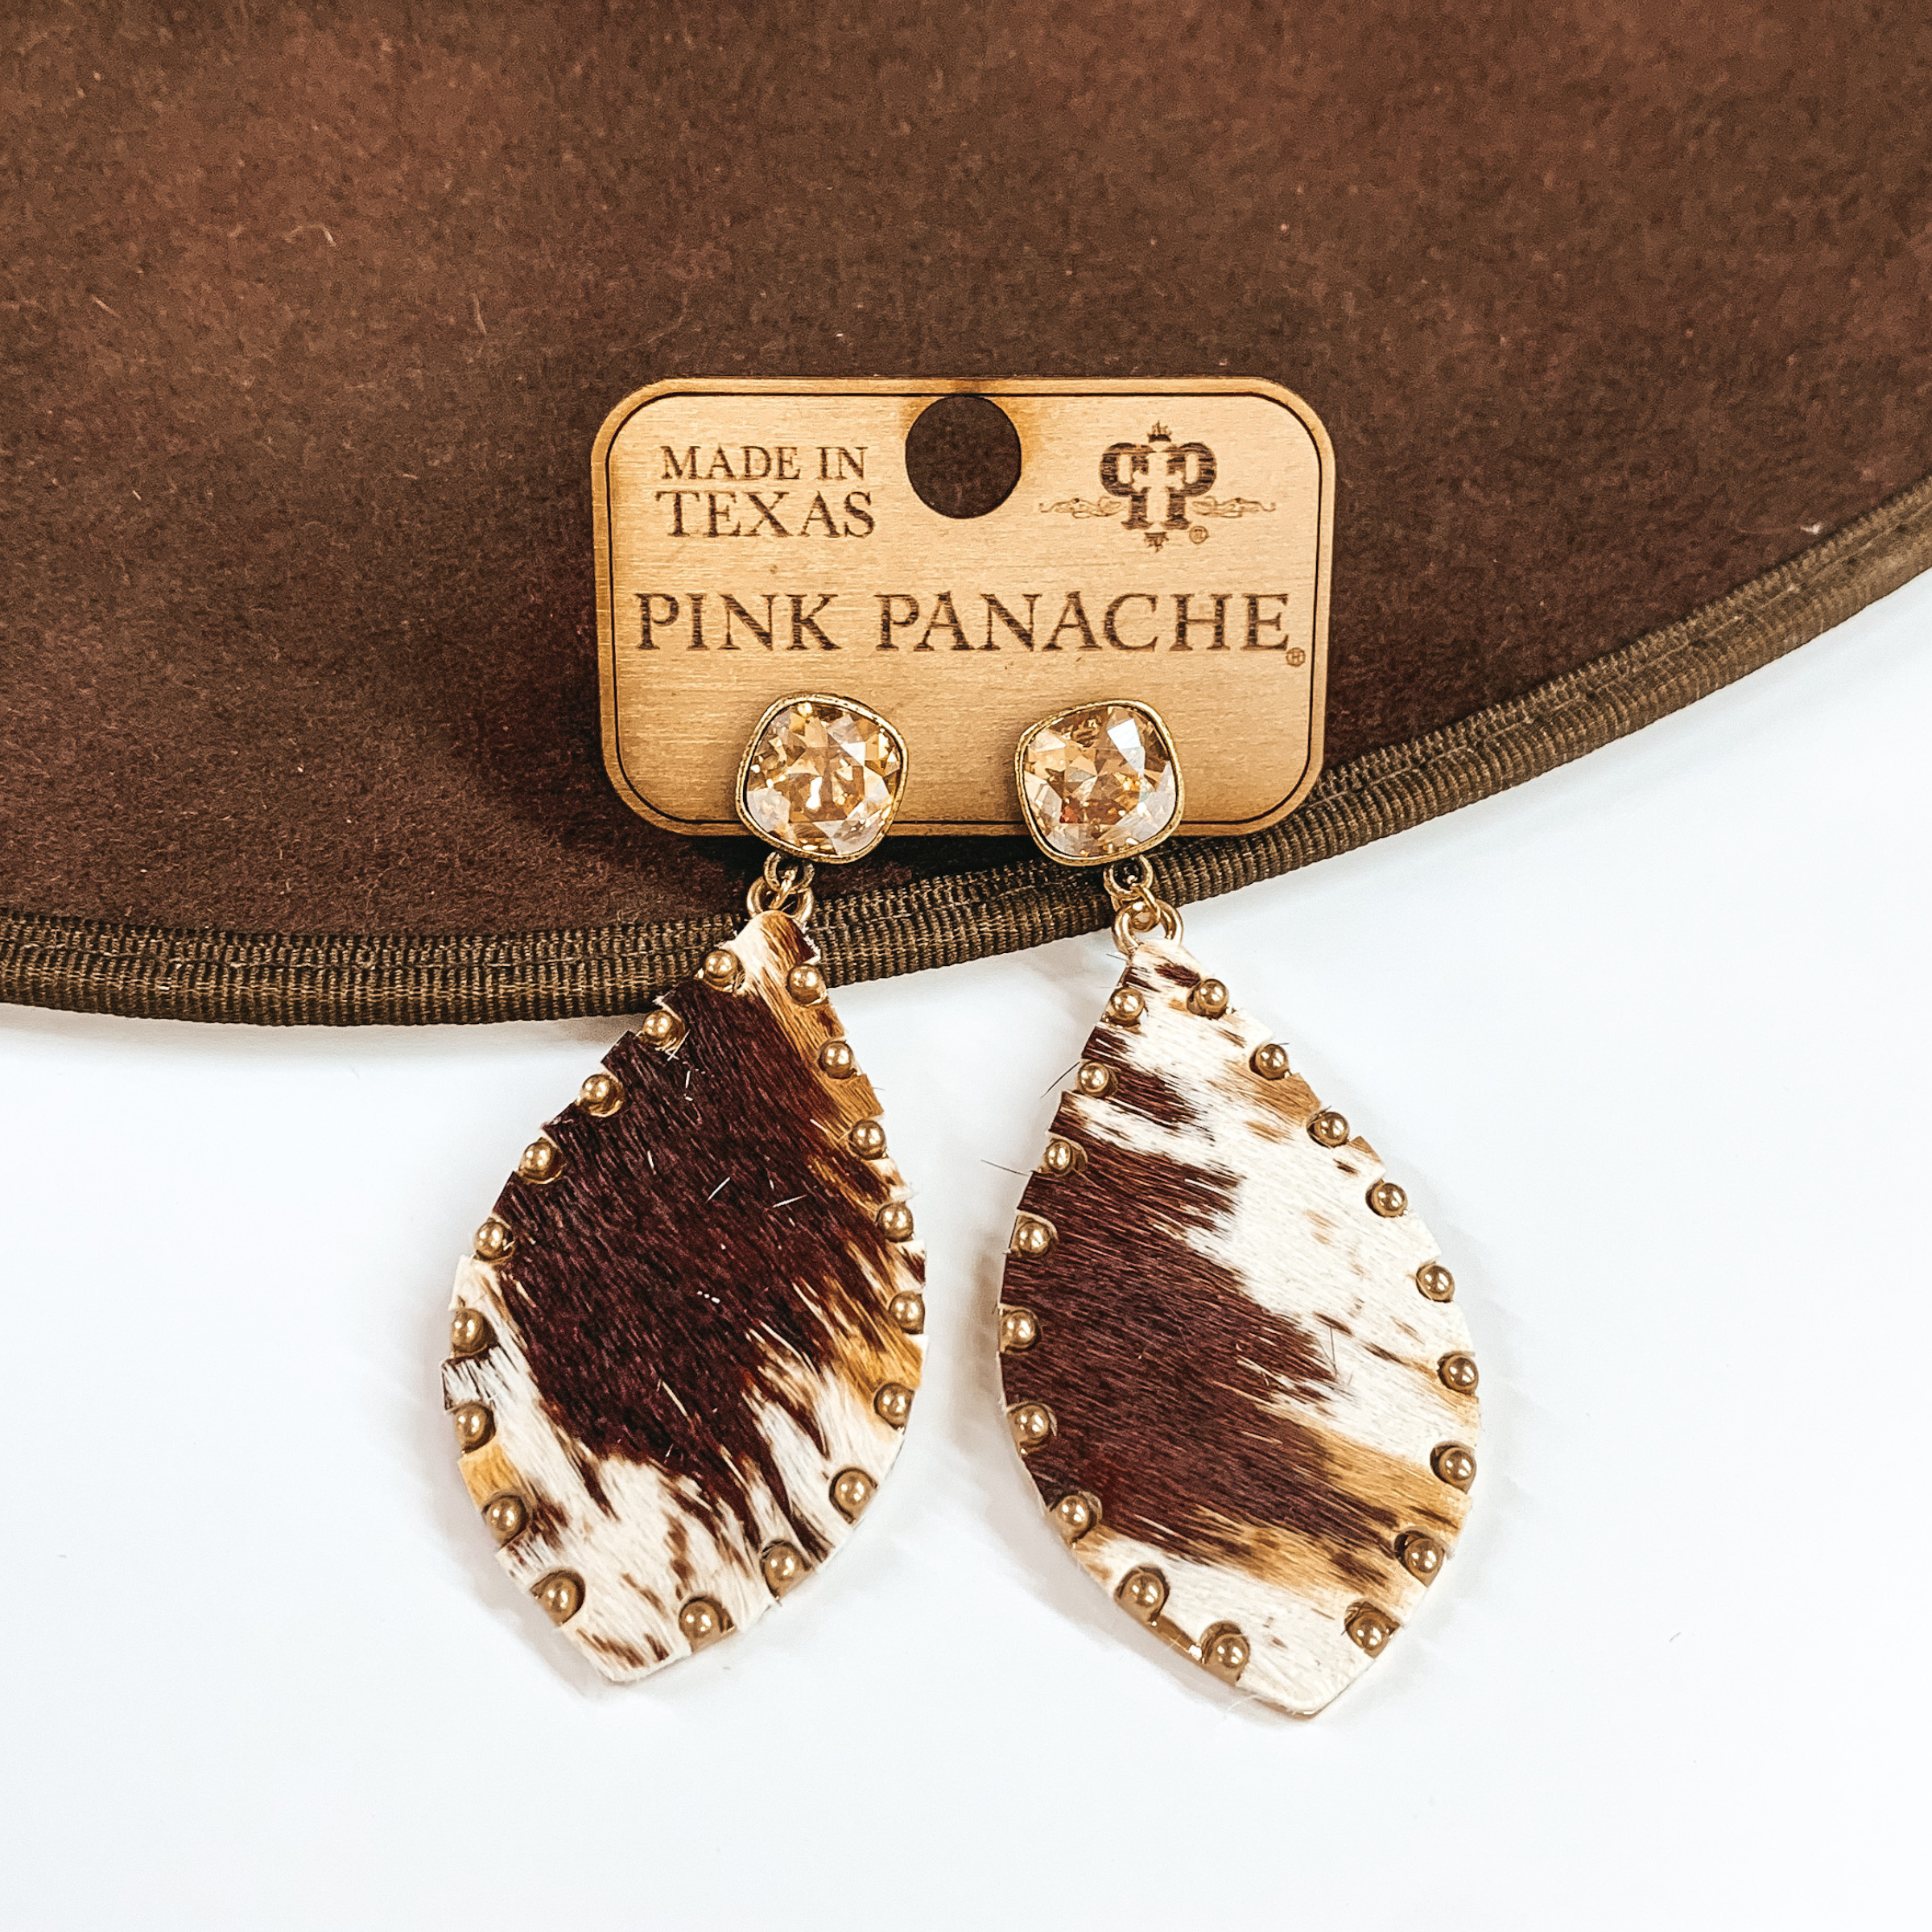 Pair of brindle print teardrop earrings with golden shadow cushion cut crystal stud earrings. These earrings are pictured laying partially on a brown hat brim on a white background.